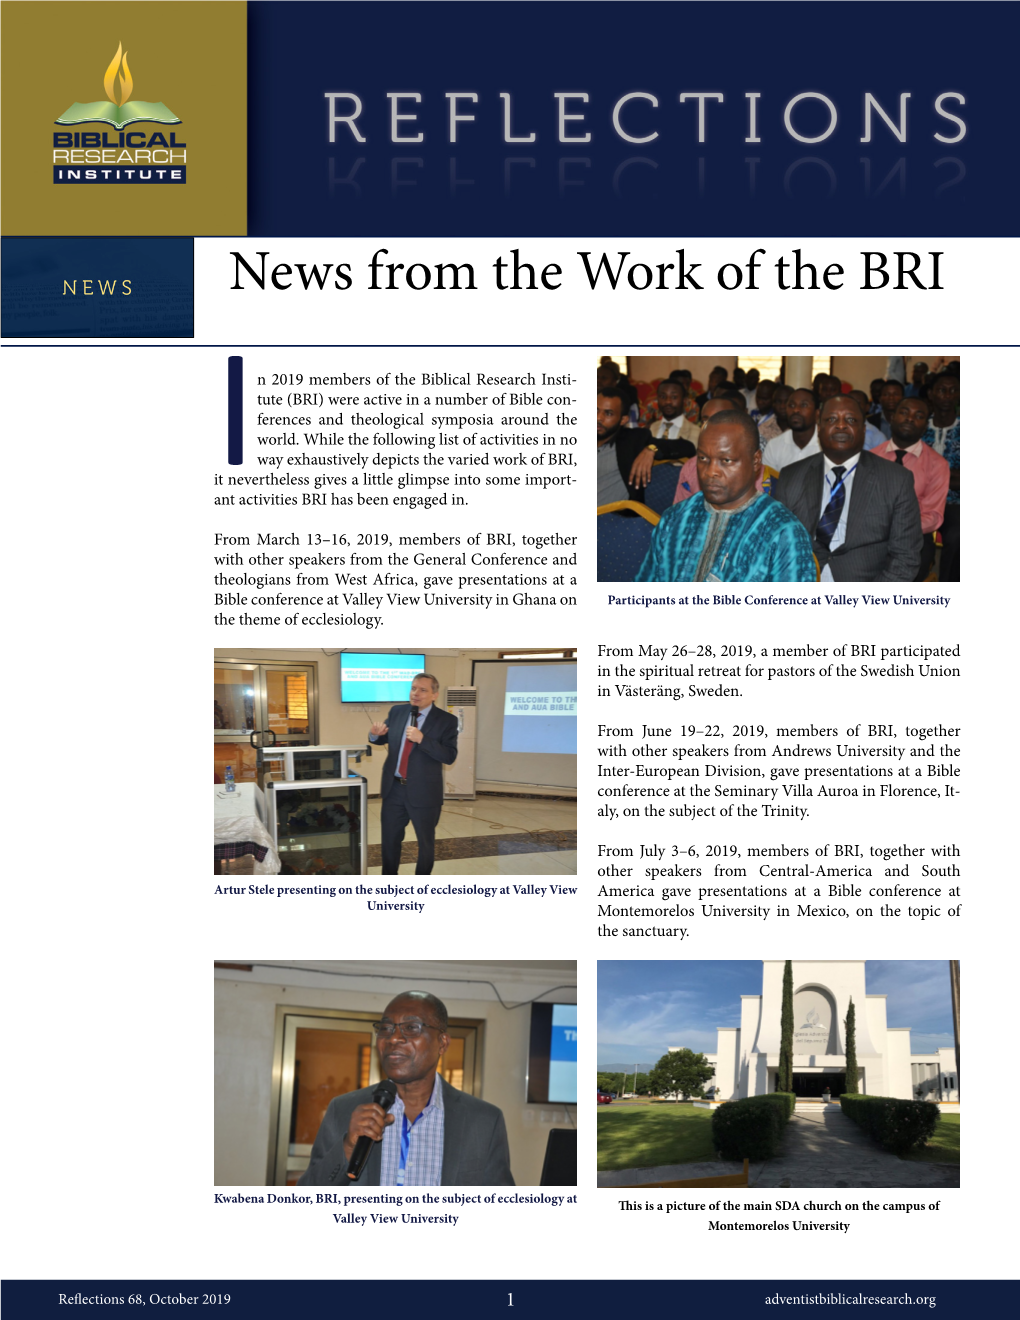 News from the Work of the BRI